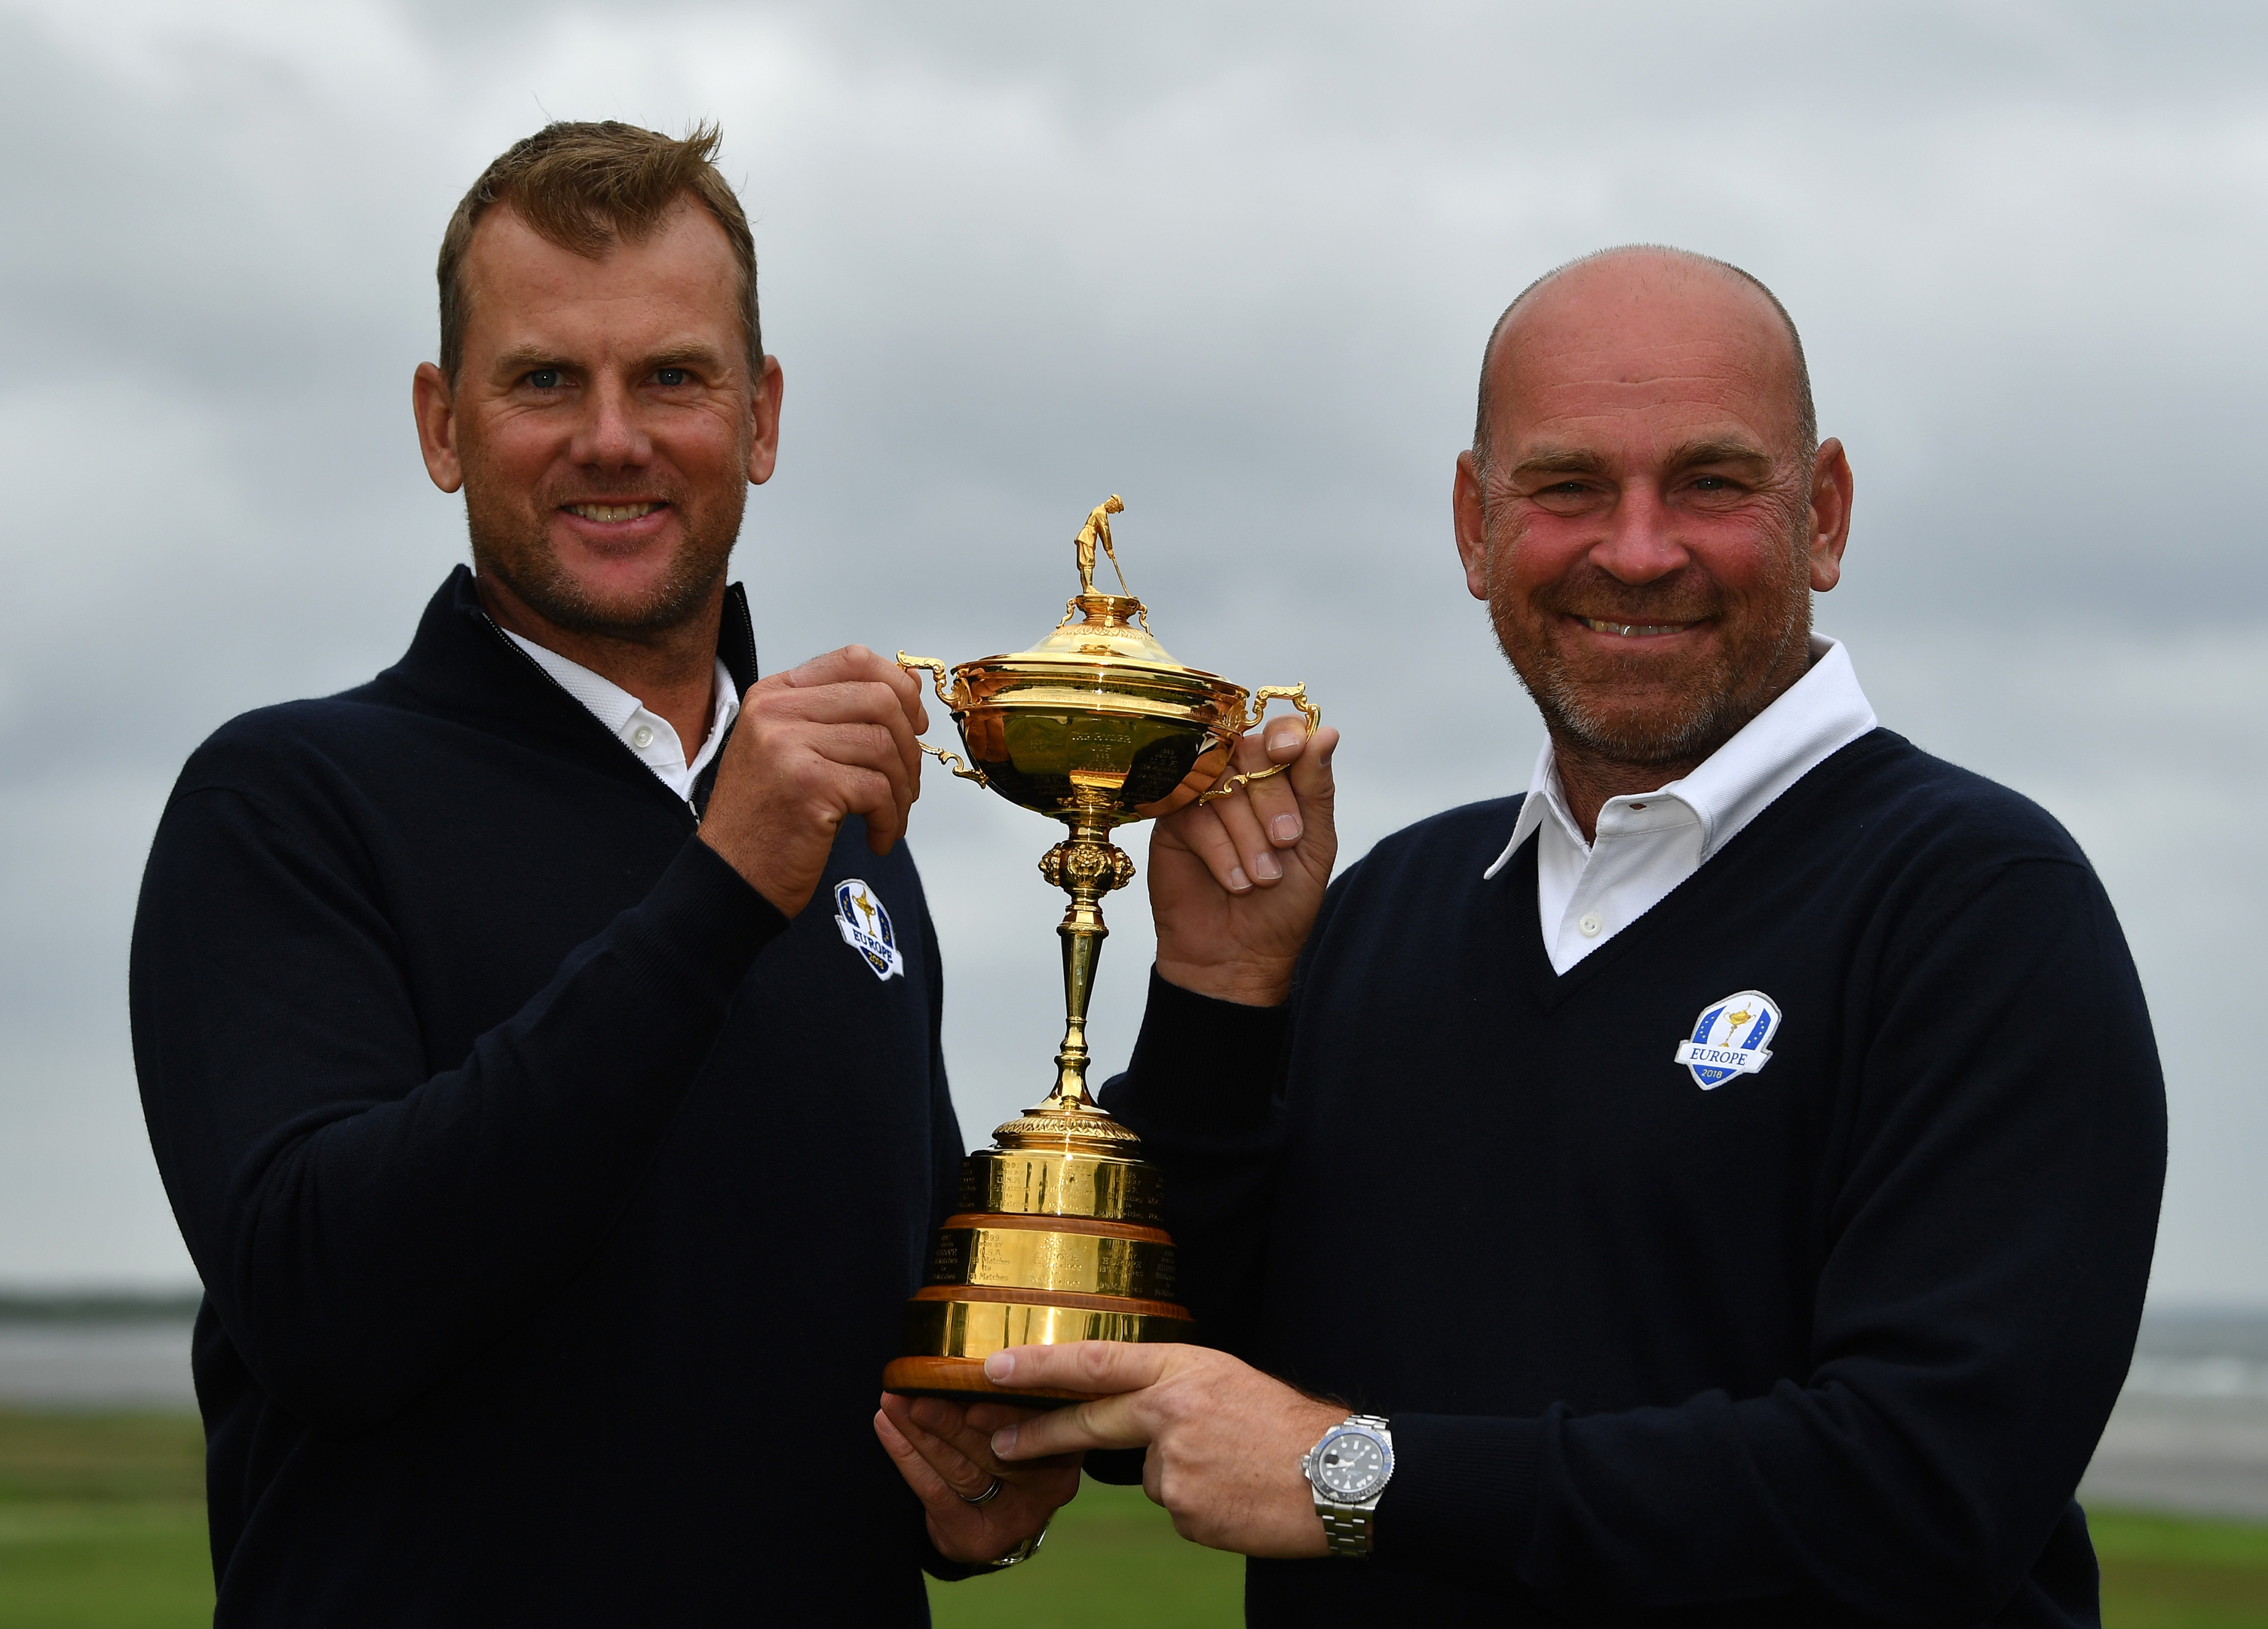 Robert Karlsson is the first of European Ryder Cup captain Thomas Bjorn's assistants for the matches against the USA in Paris next year.